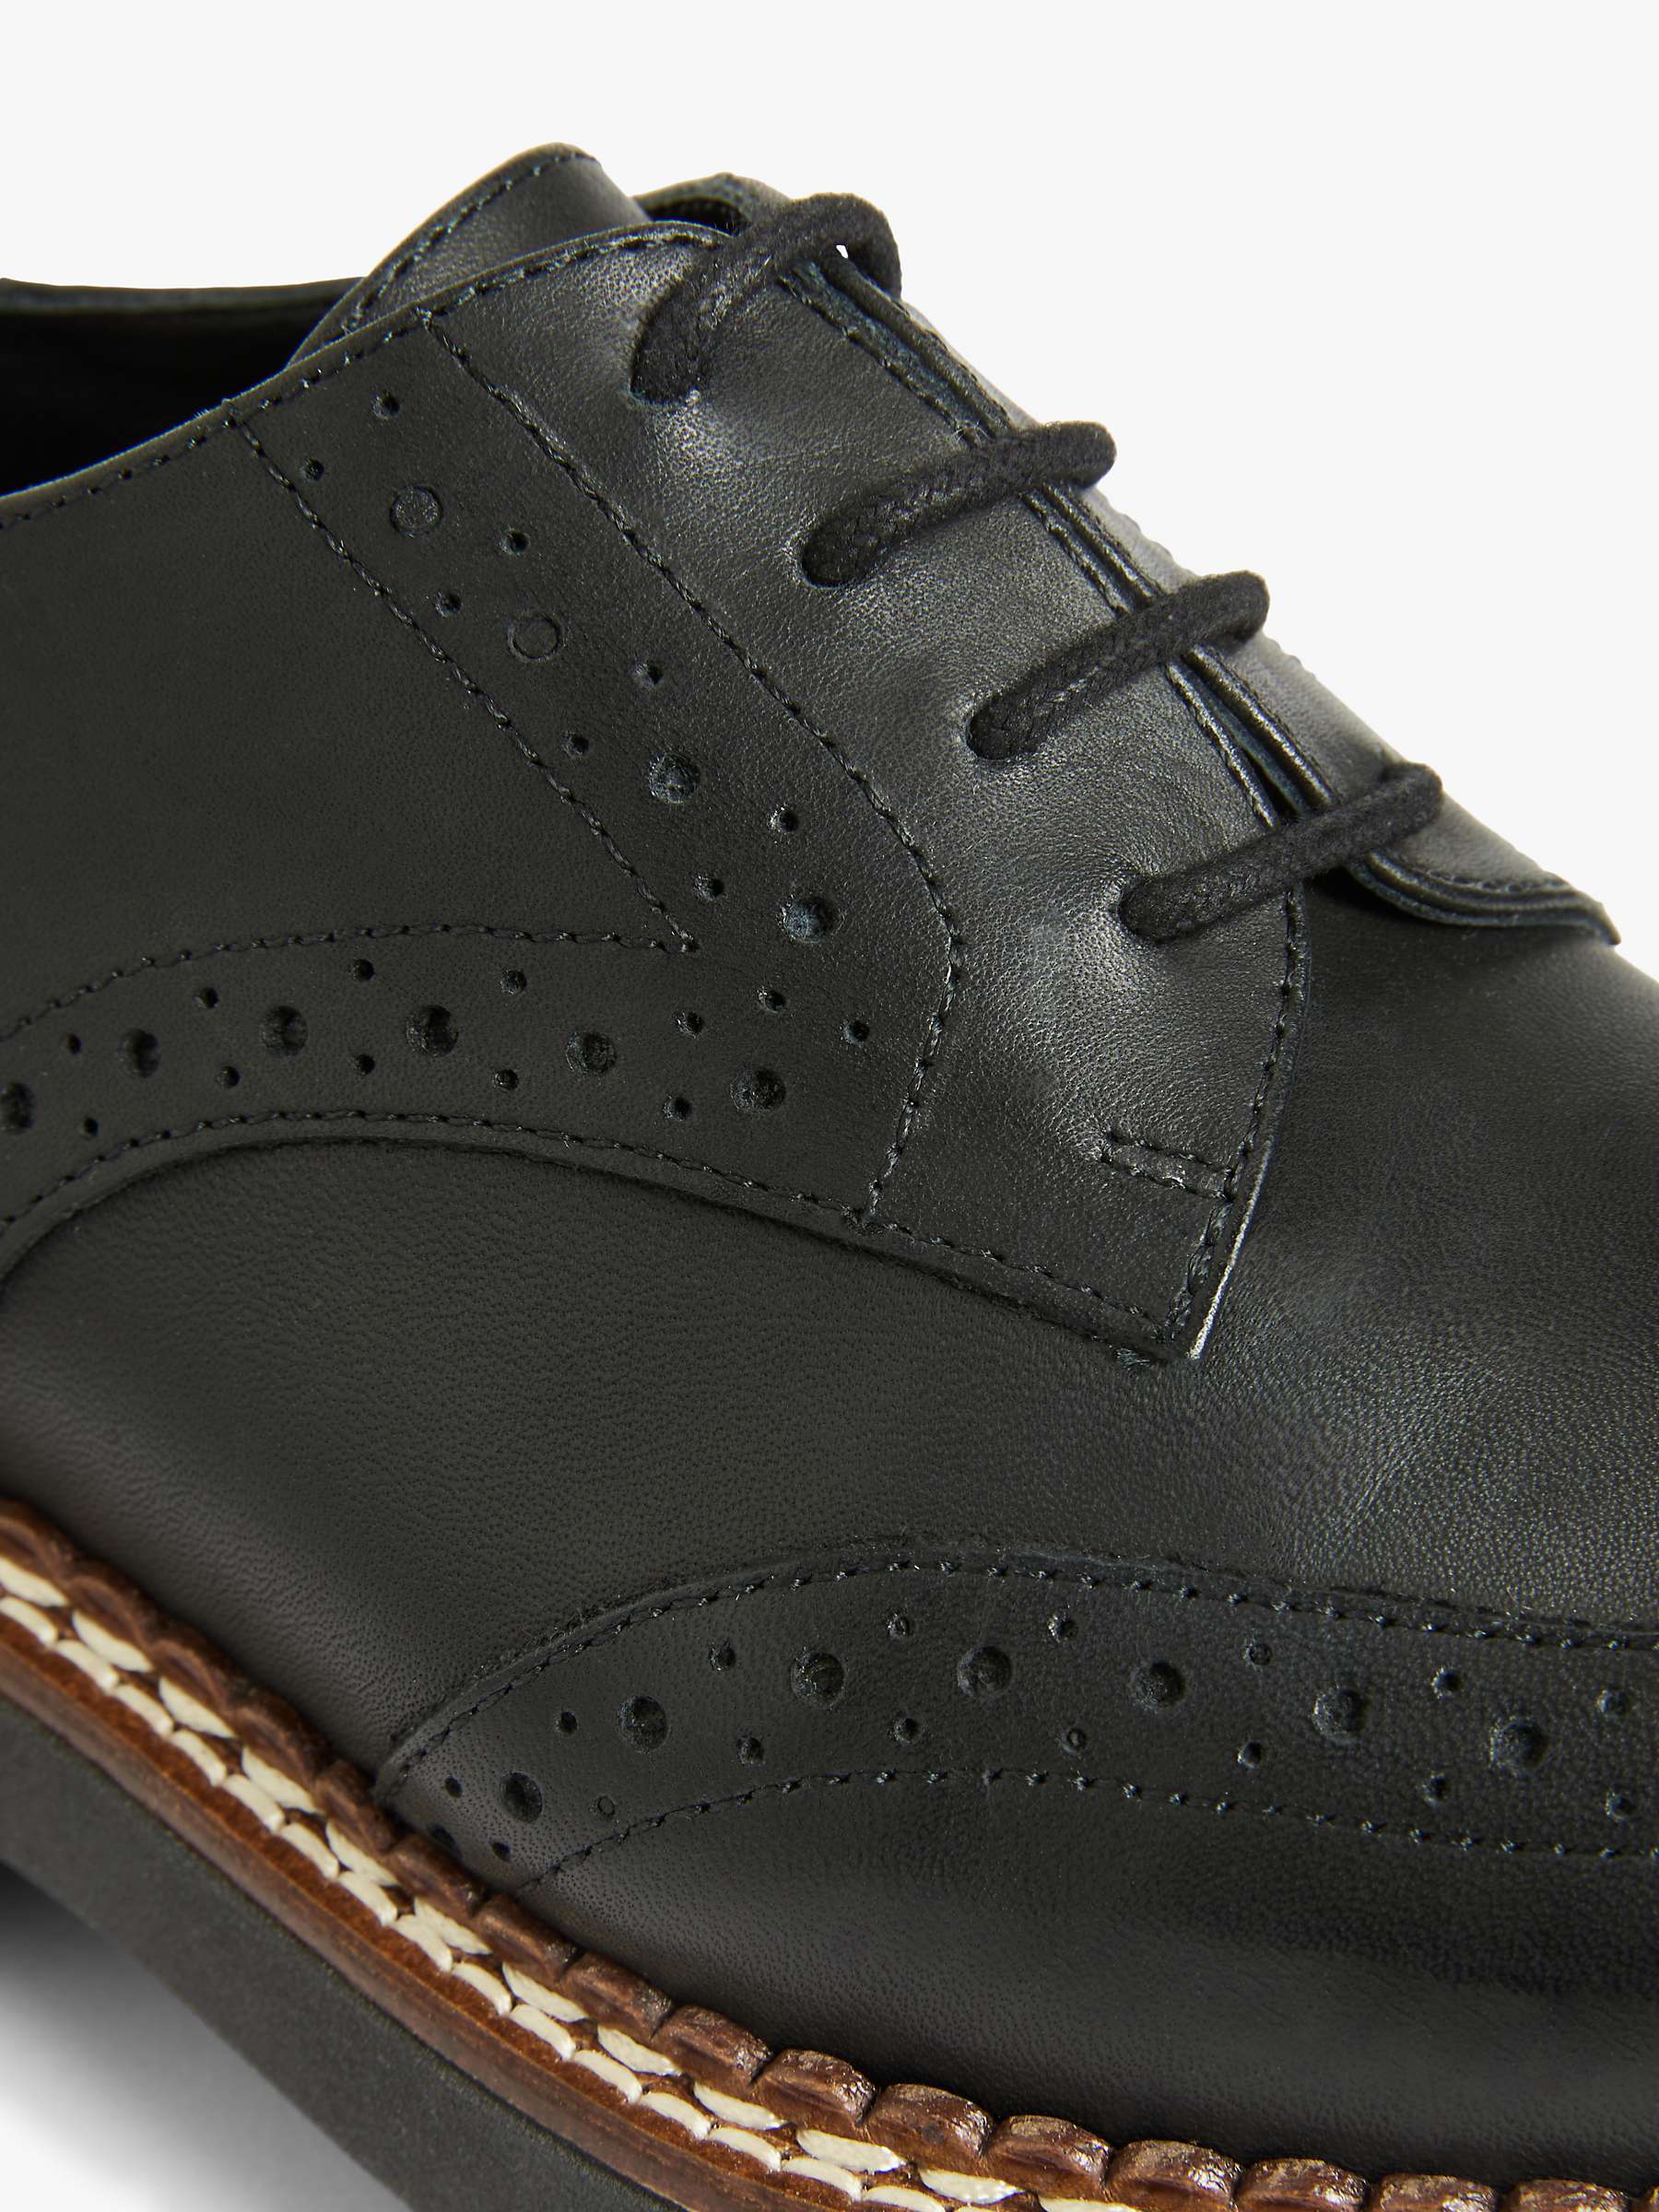 Buy Kin Faye Cleated Sole Brogue Shoes Online at johnlewis.com